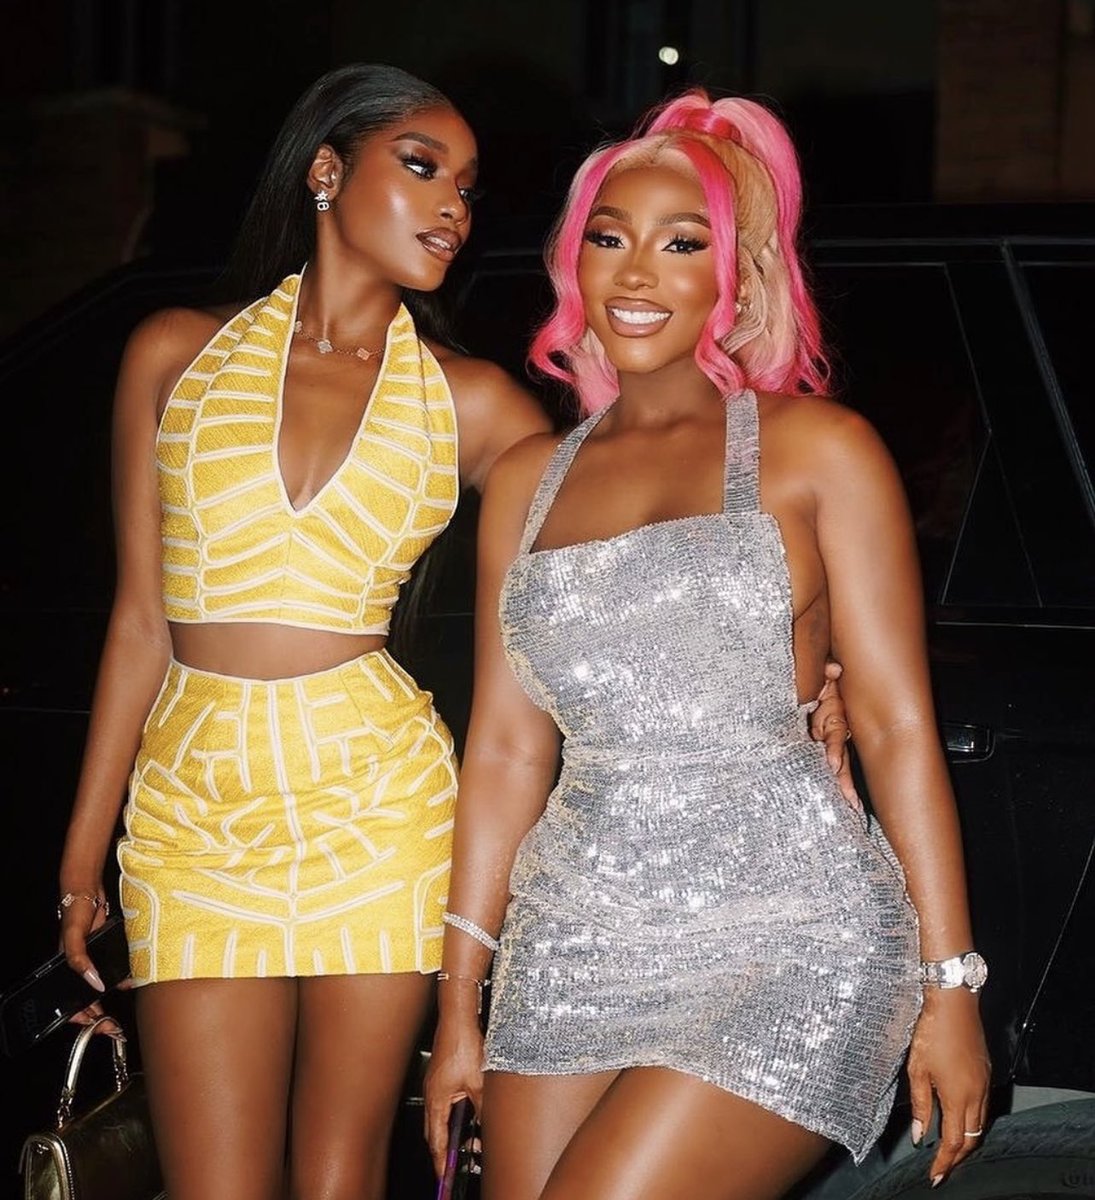 So excited to see how these two Queens slay tomorrow for AMVCA 🥰🤩

#AMVCA10 #MercyEkeᗢ #BeautyTukura